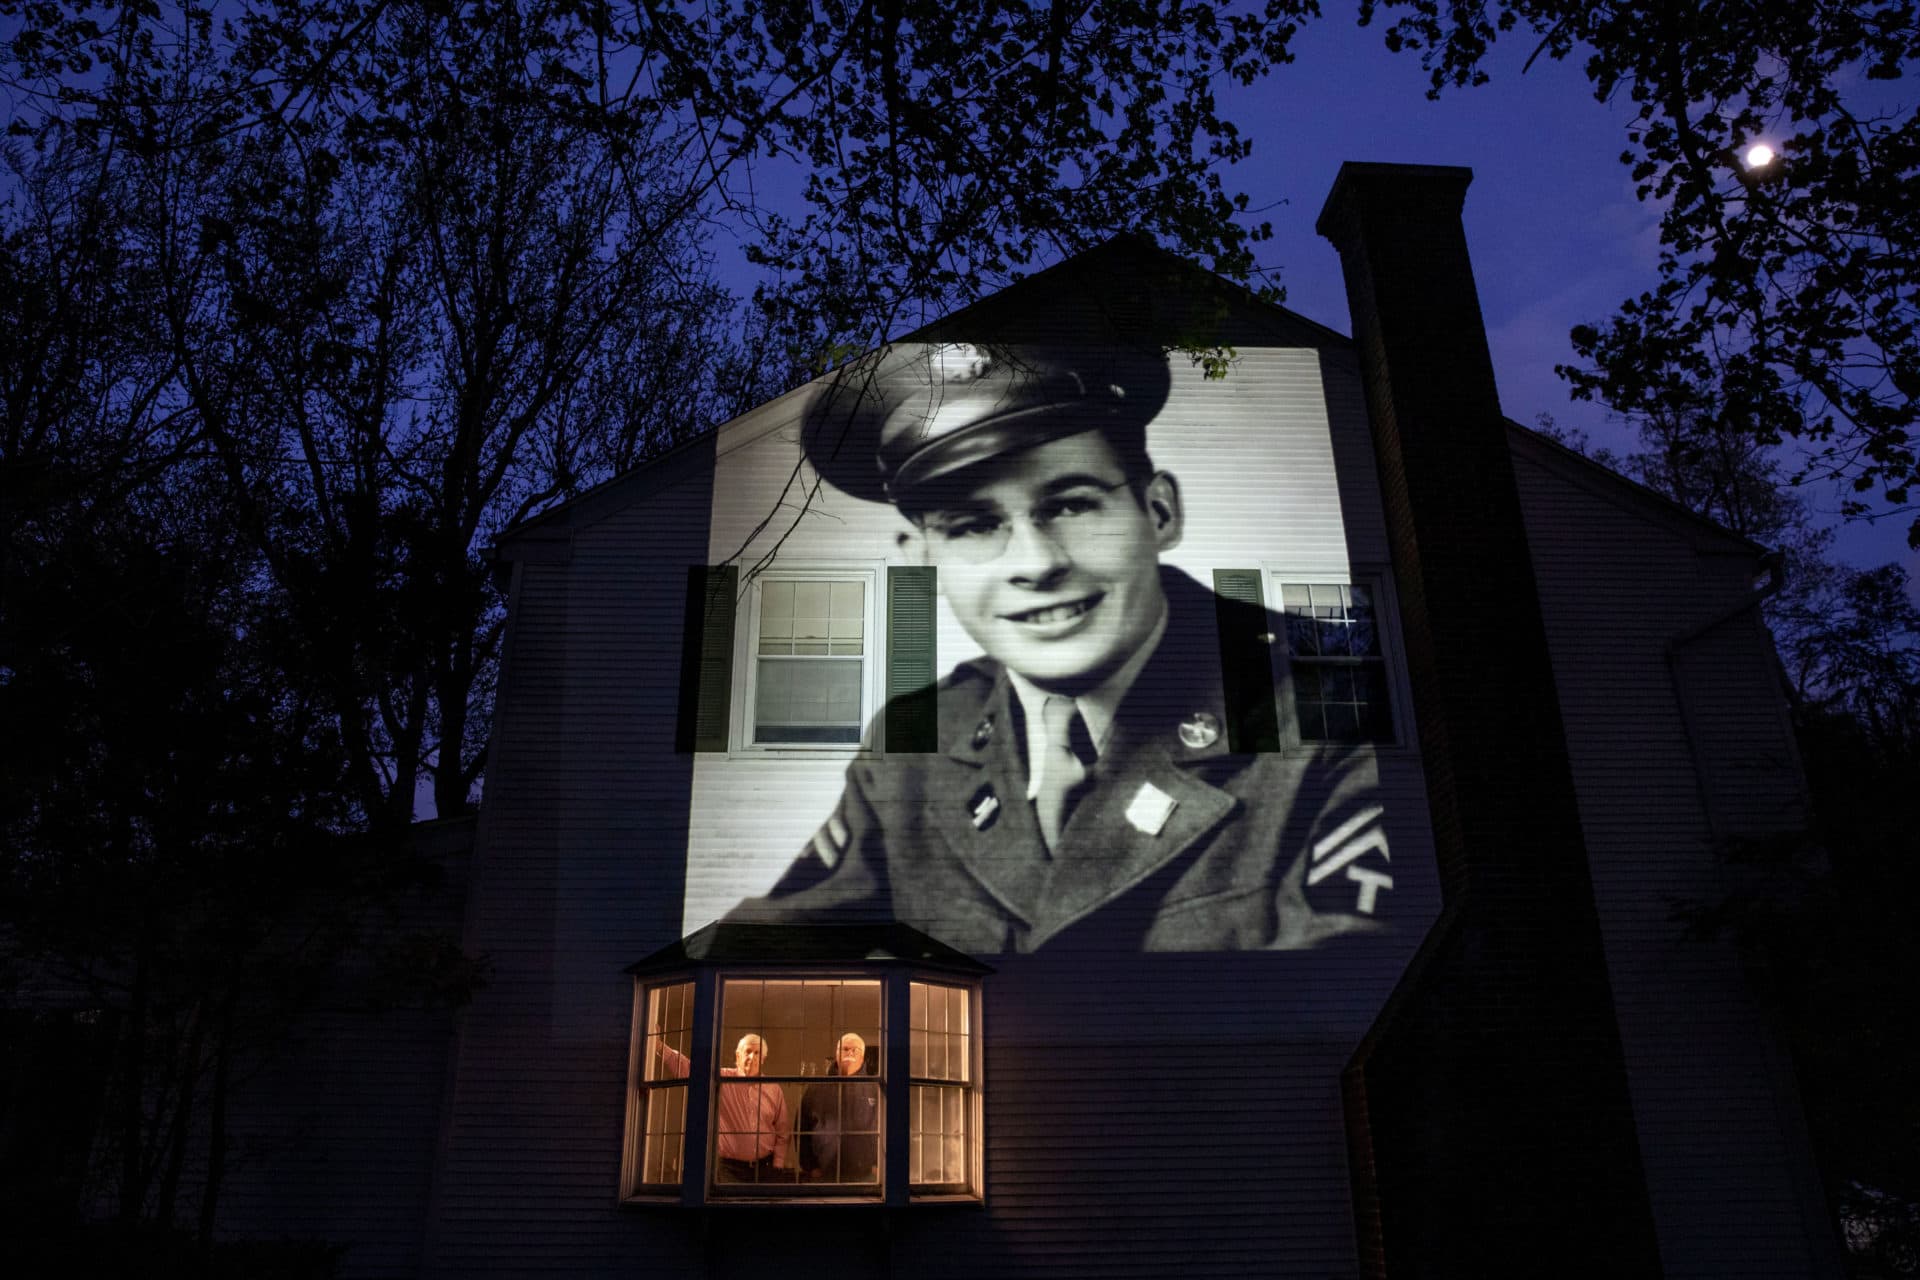 An image of veteran James Sullivan is projected onto the home of his son, Tom Sullivan, left, as he looks out a window with his brother, Joseph Sullivan, in South Hadley, Mass. (David Goldman/AP)